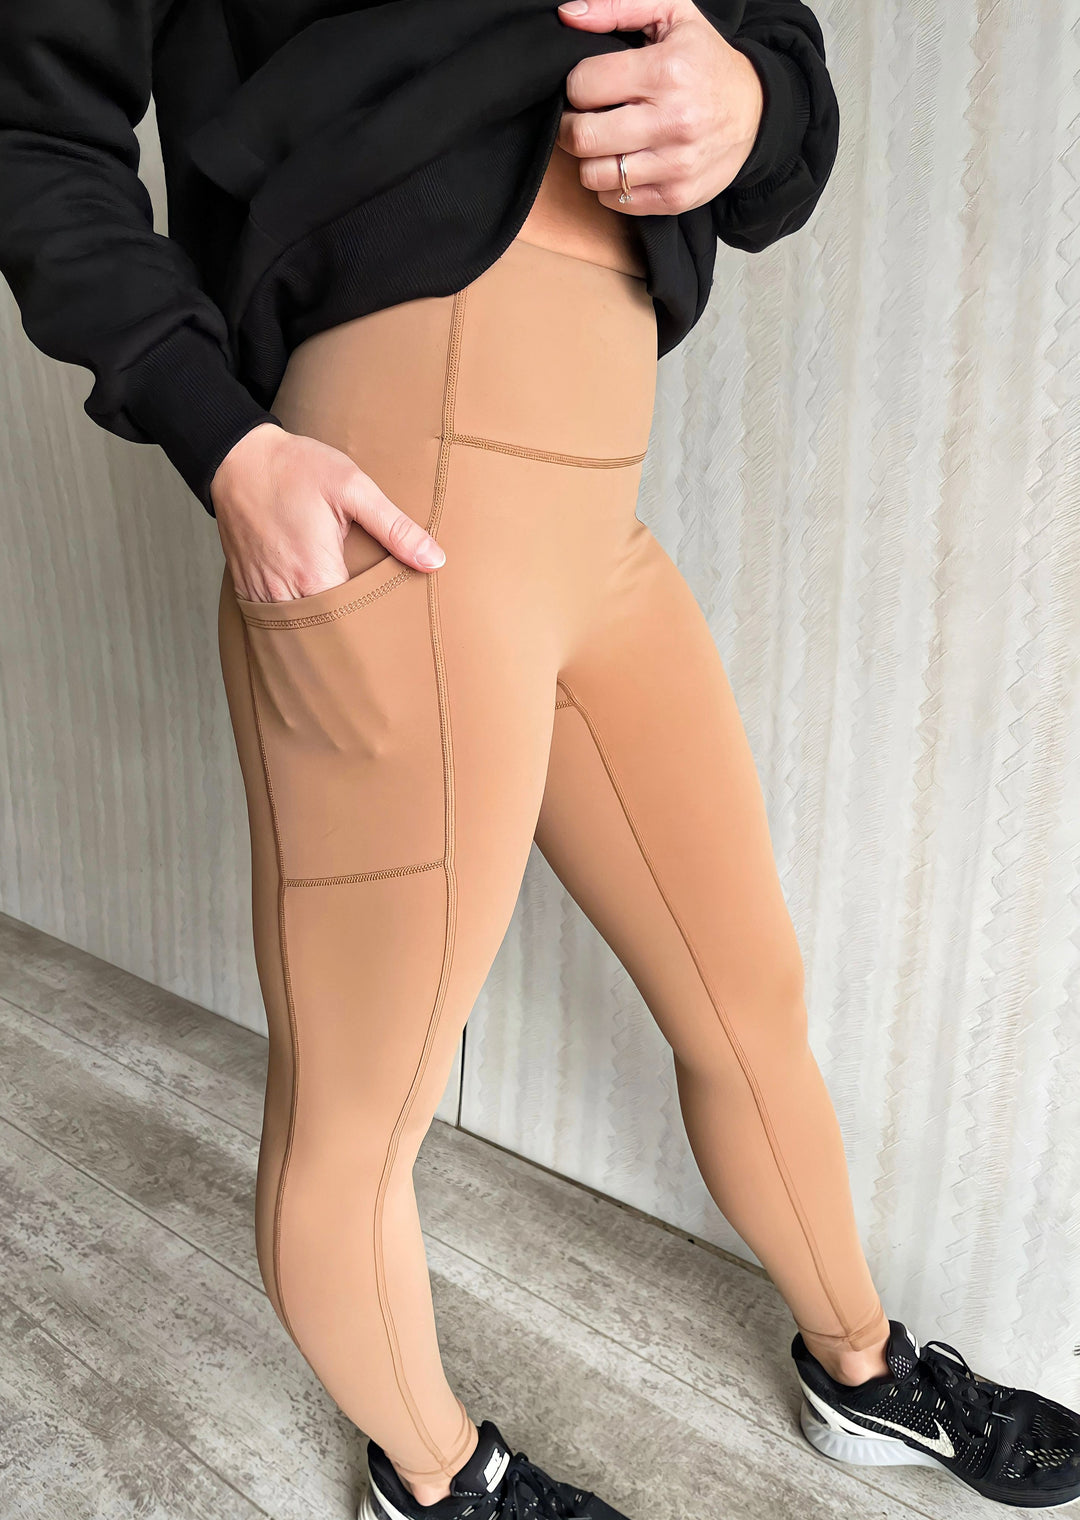 Women's Nude Colored Leggings / High Waisted Leggings / Women's Athleisure Clothes